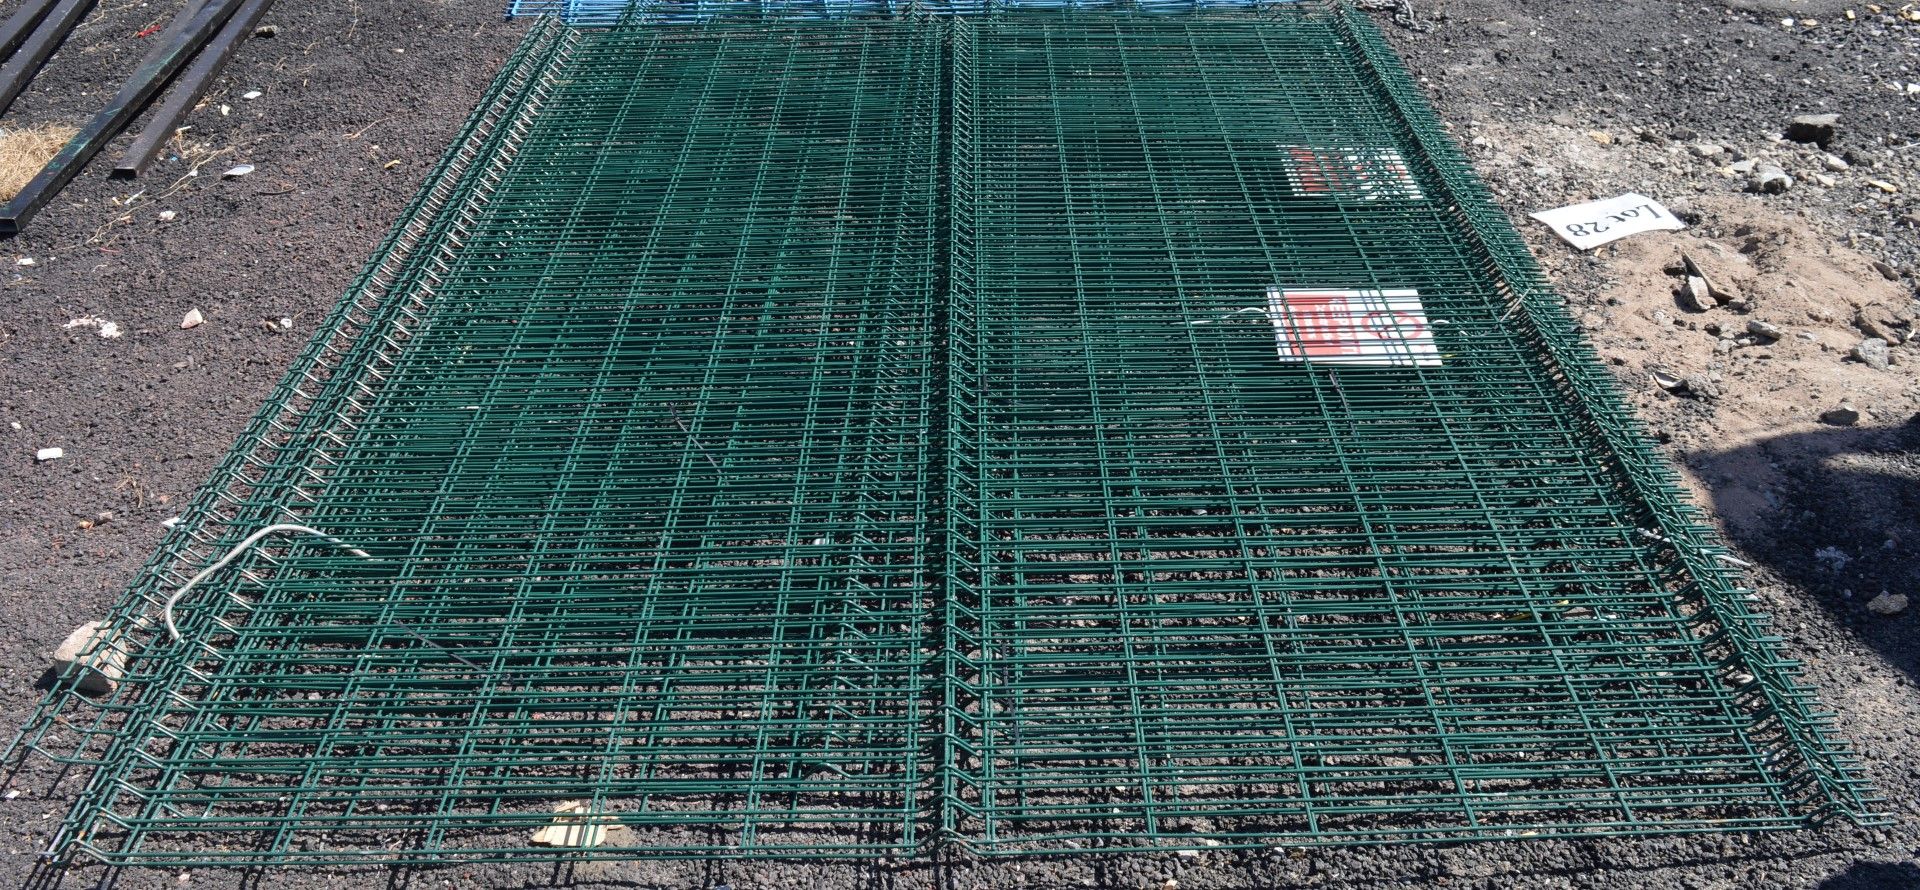 7 x Sections of Wire Fence in Green - Includes Fence Posts - Each Panel Measures 300 x 250 cms - - Image 4 of 5